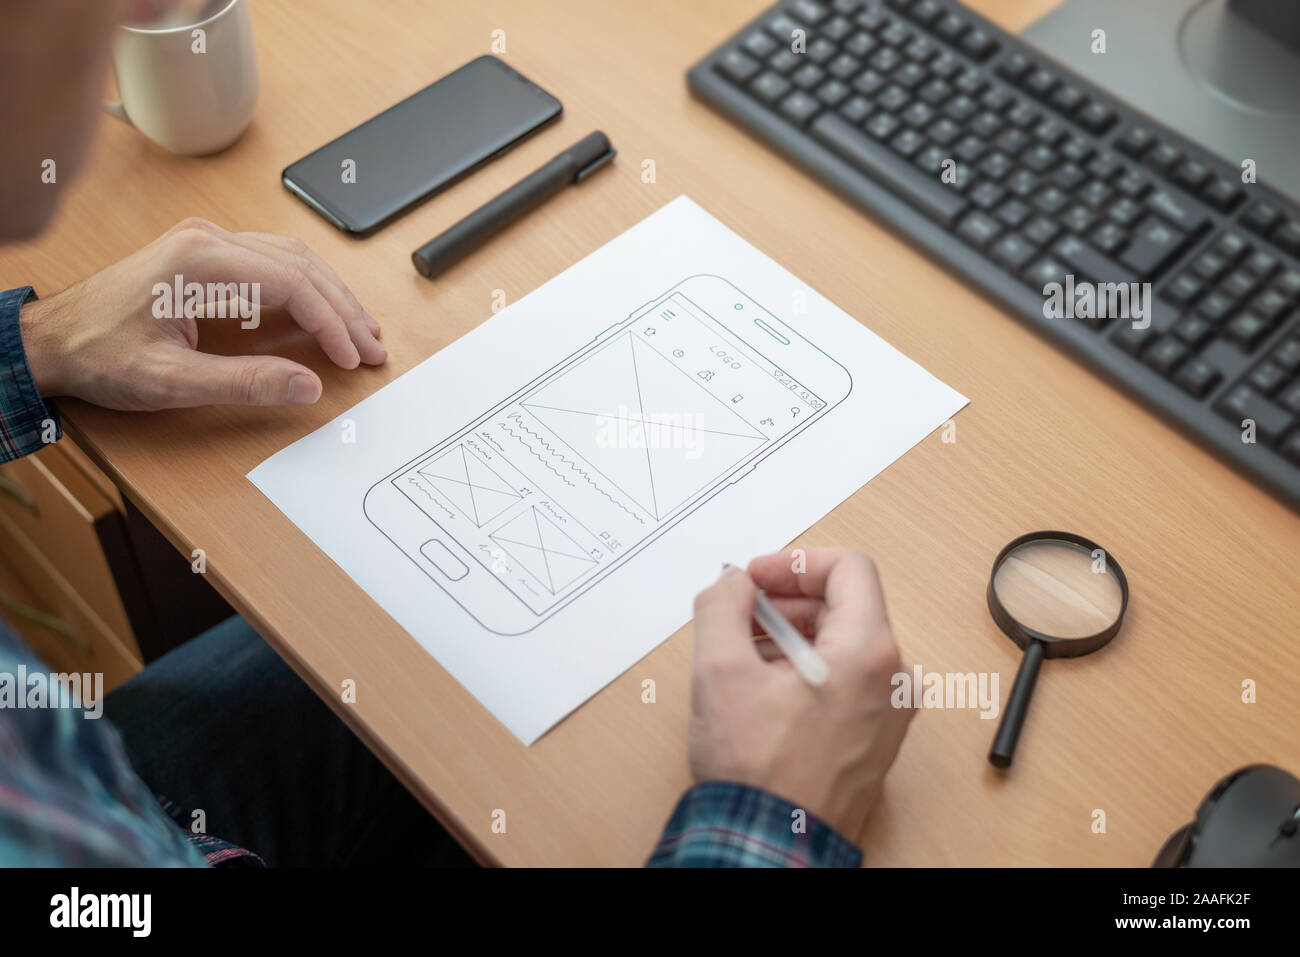 The designer sketches, draws the layout of a mobile phone app on a wireframe. Stock Photo